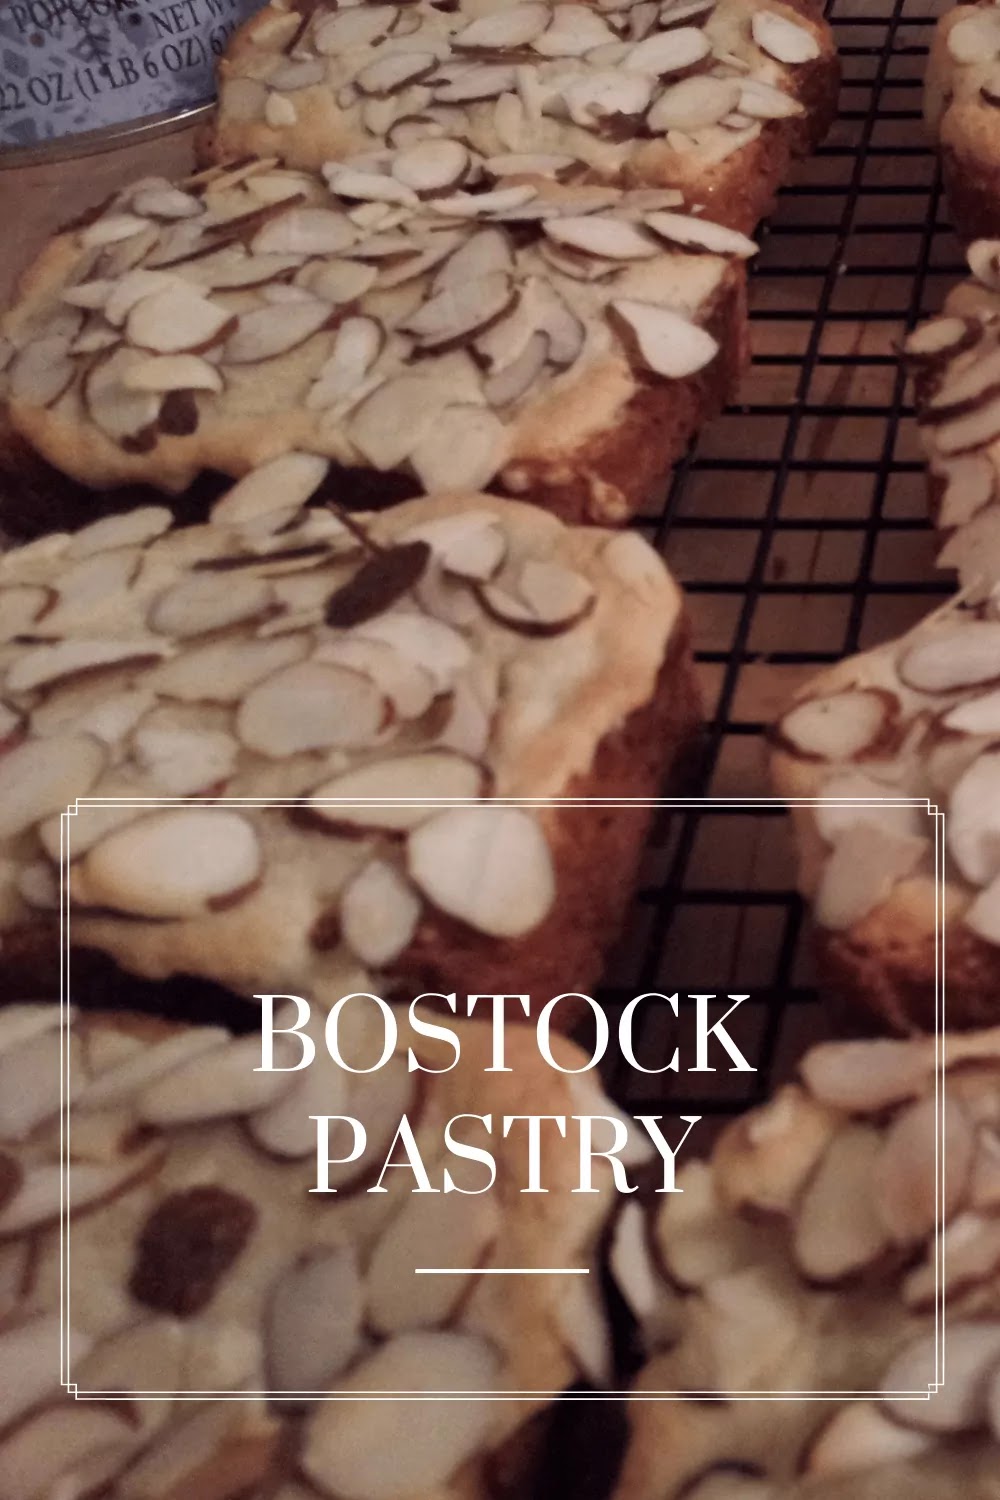 Bostock Pastry: Brioche slices sprinkled with almond slices